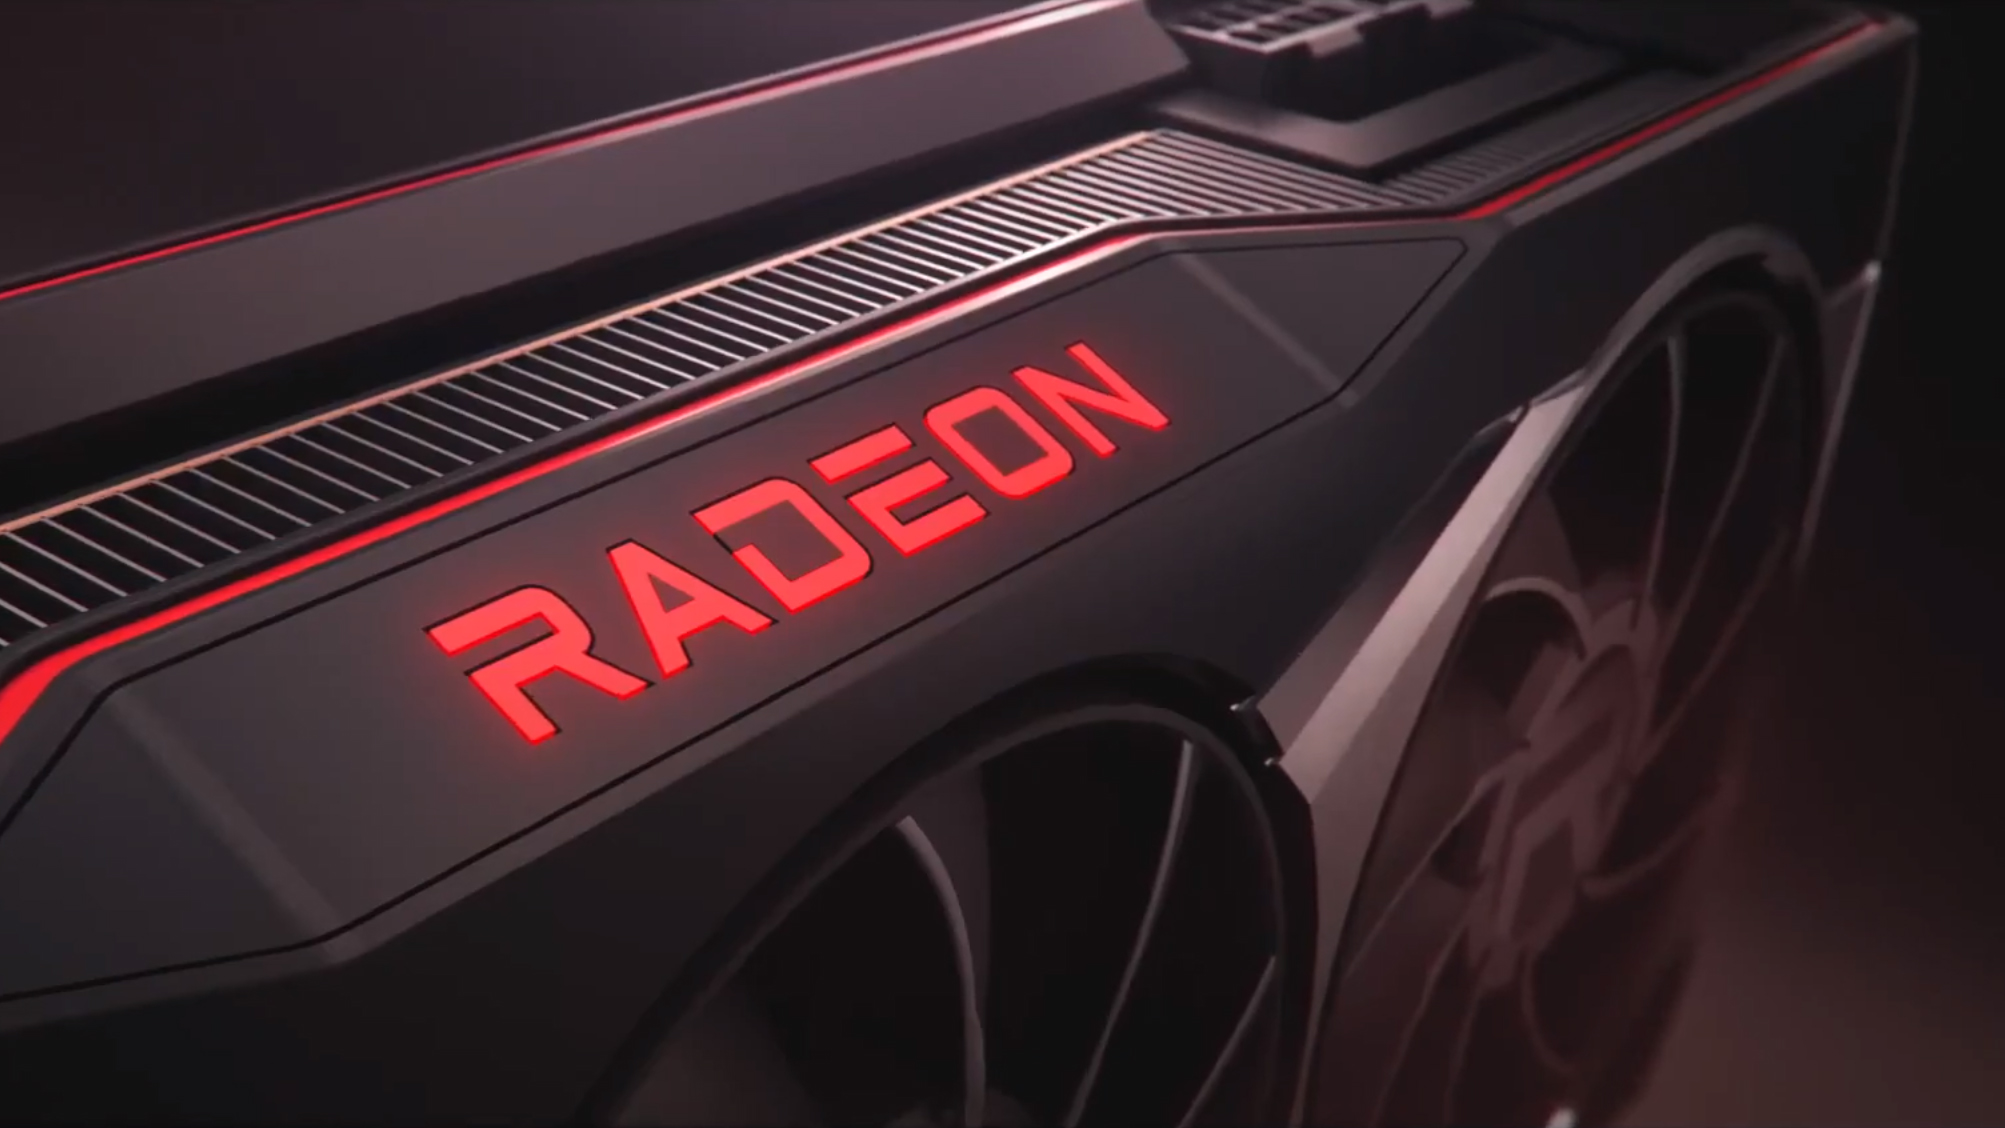 Amd Rx 6500 Xt Arrives At Ces 2022 To Challenge Nvidia For Budget Gpu Crown